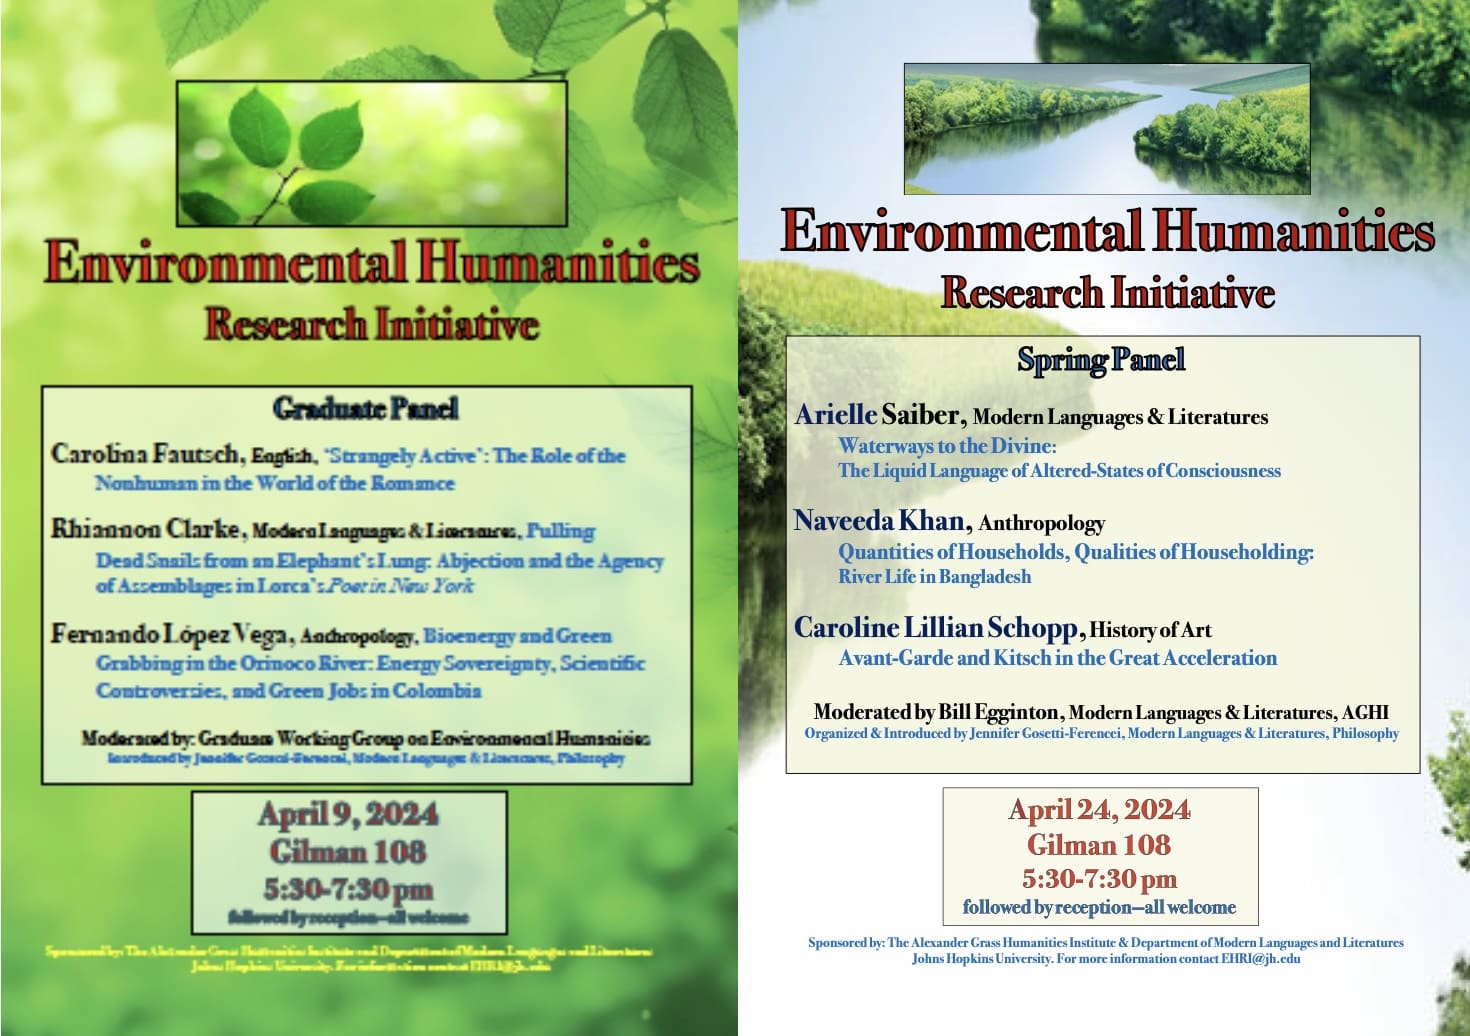 Posters for two panels featuring the speakers' names and presentation titles against a backgrounds of pictures of nature (trees and lakes).